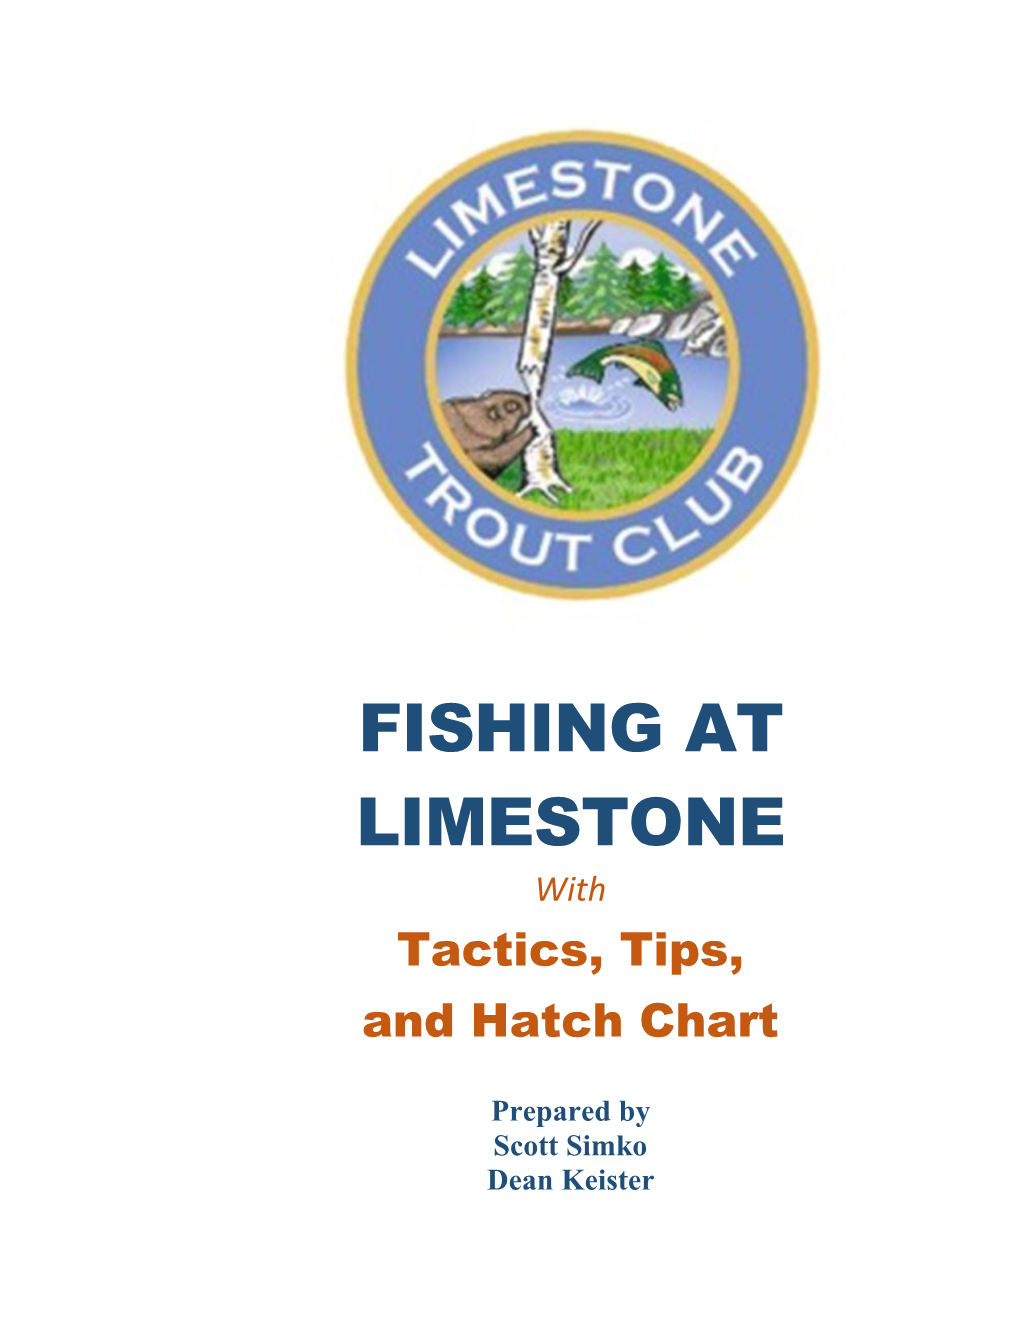 FISHING at LIMESTONE with Tactics, Tips, and Hatch Chart